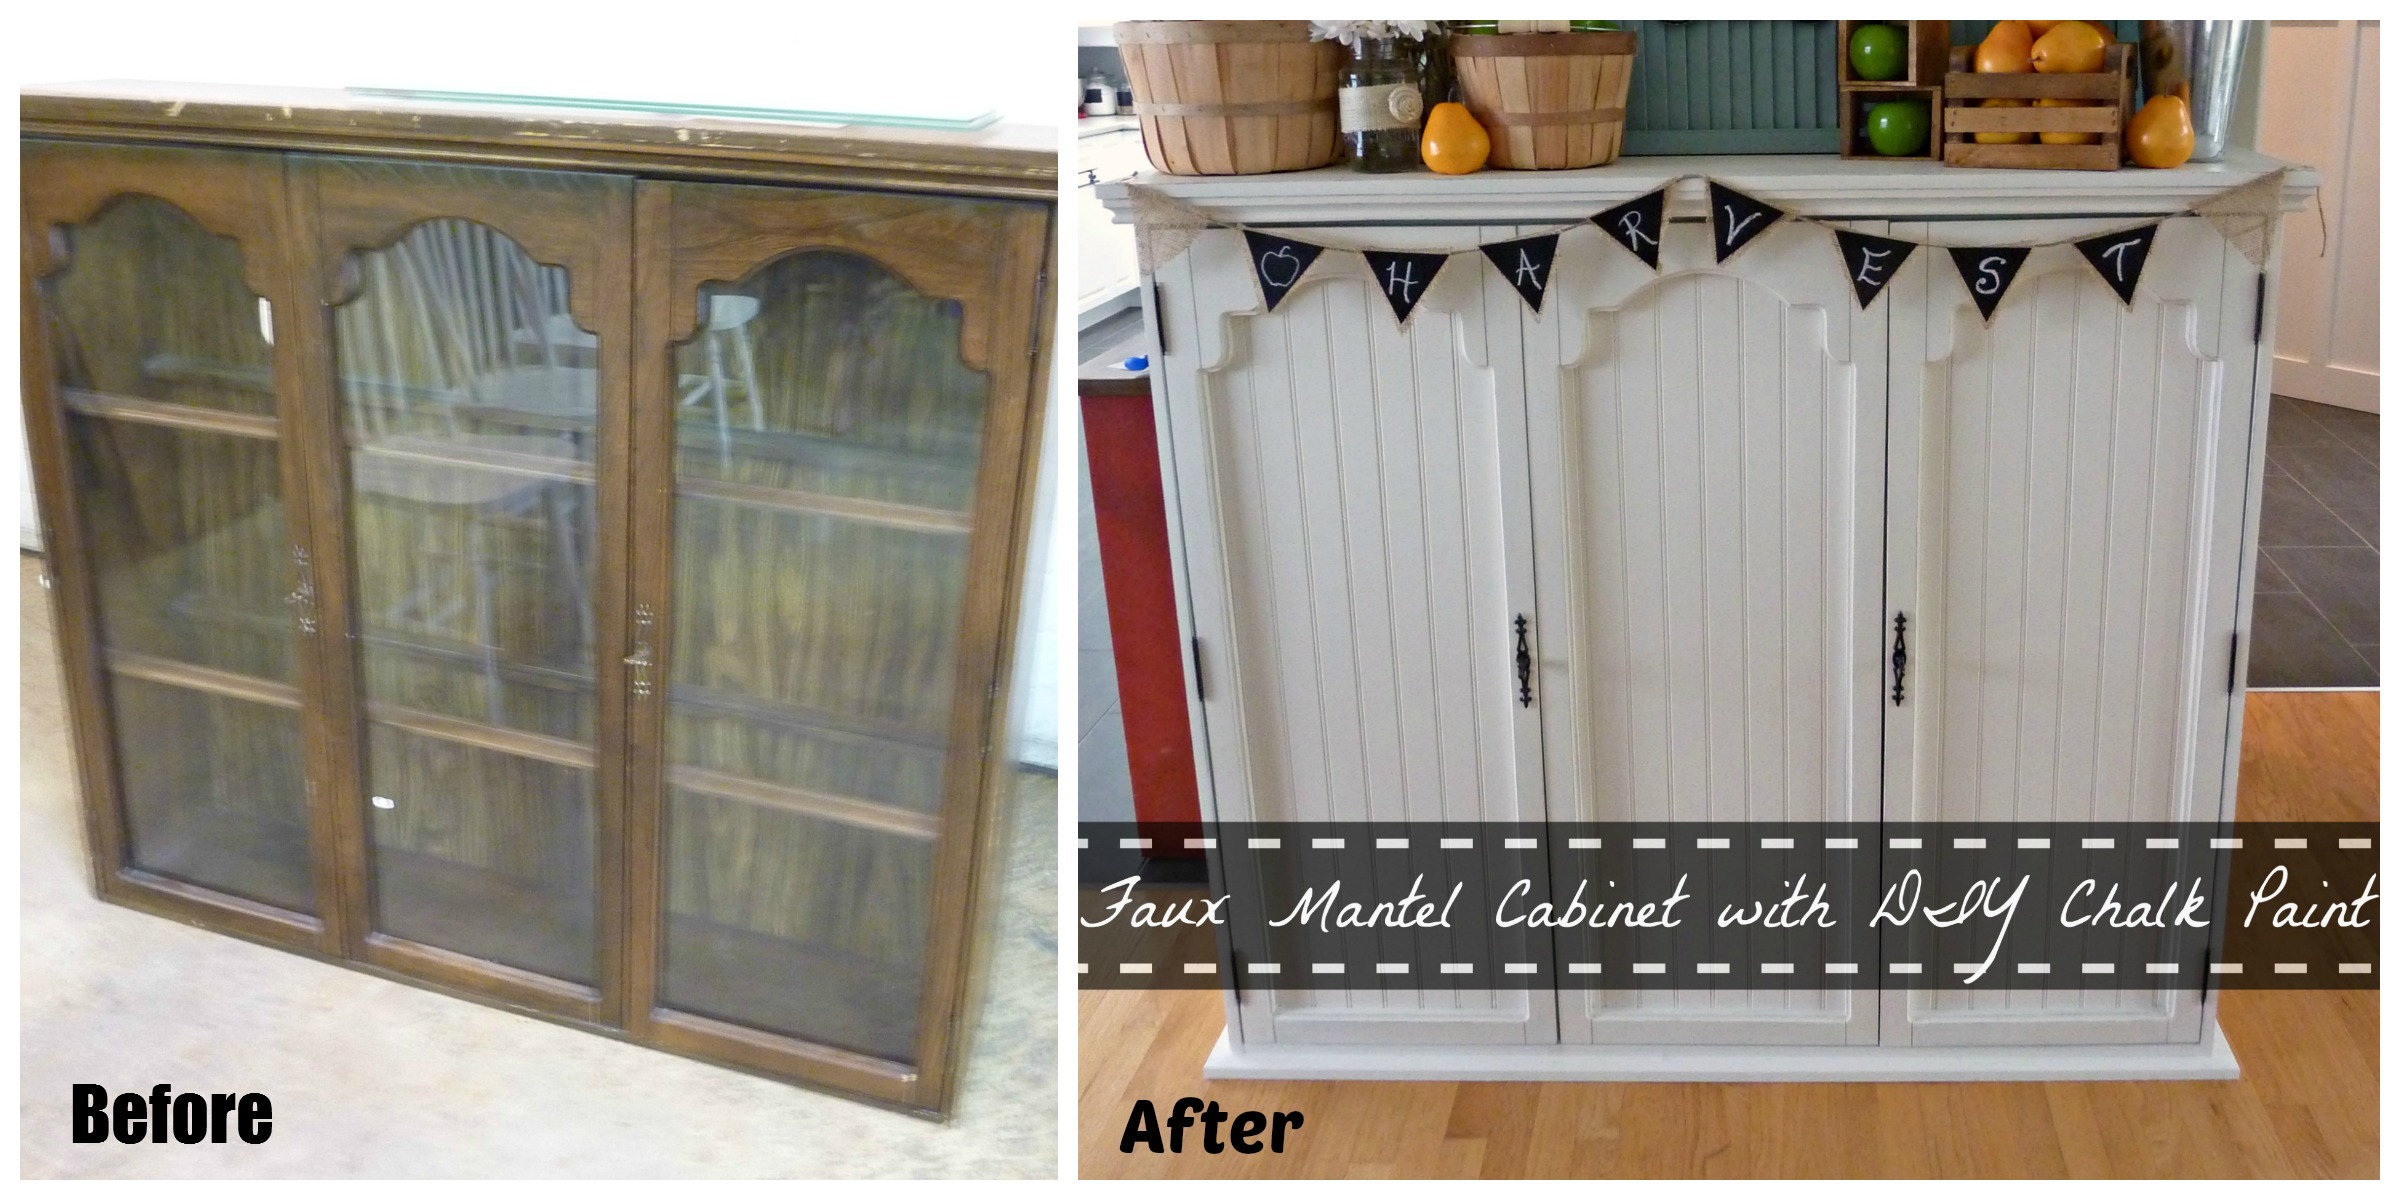 DIY Faux Mantel Cabinet made from old hutch before and after